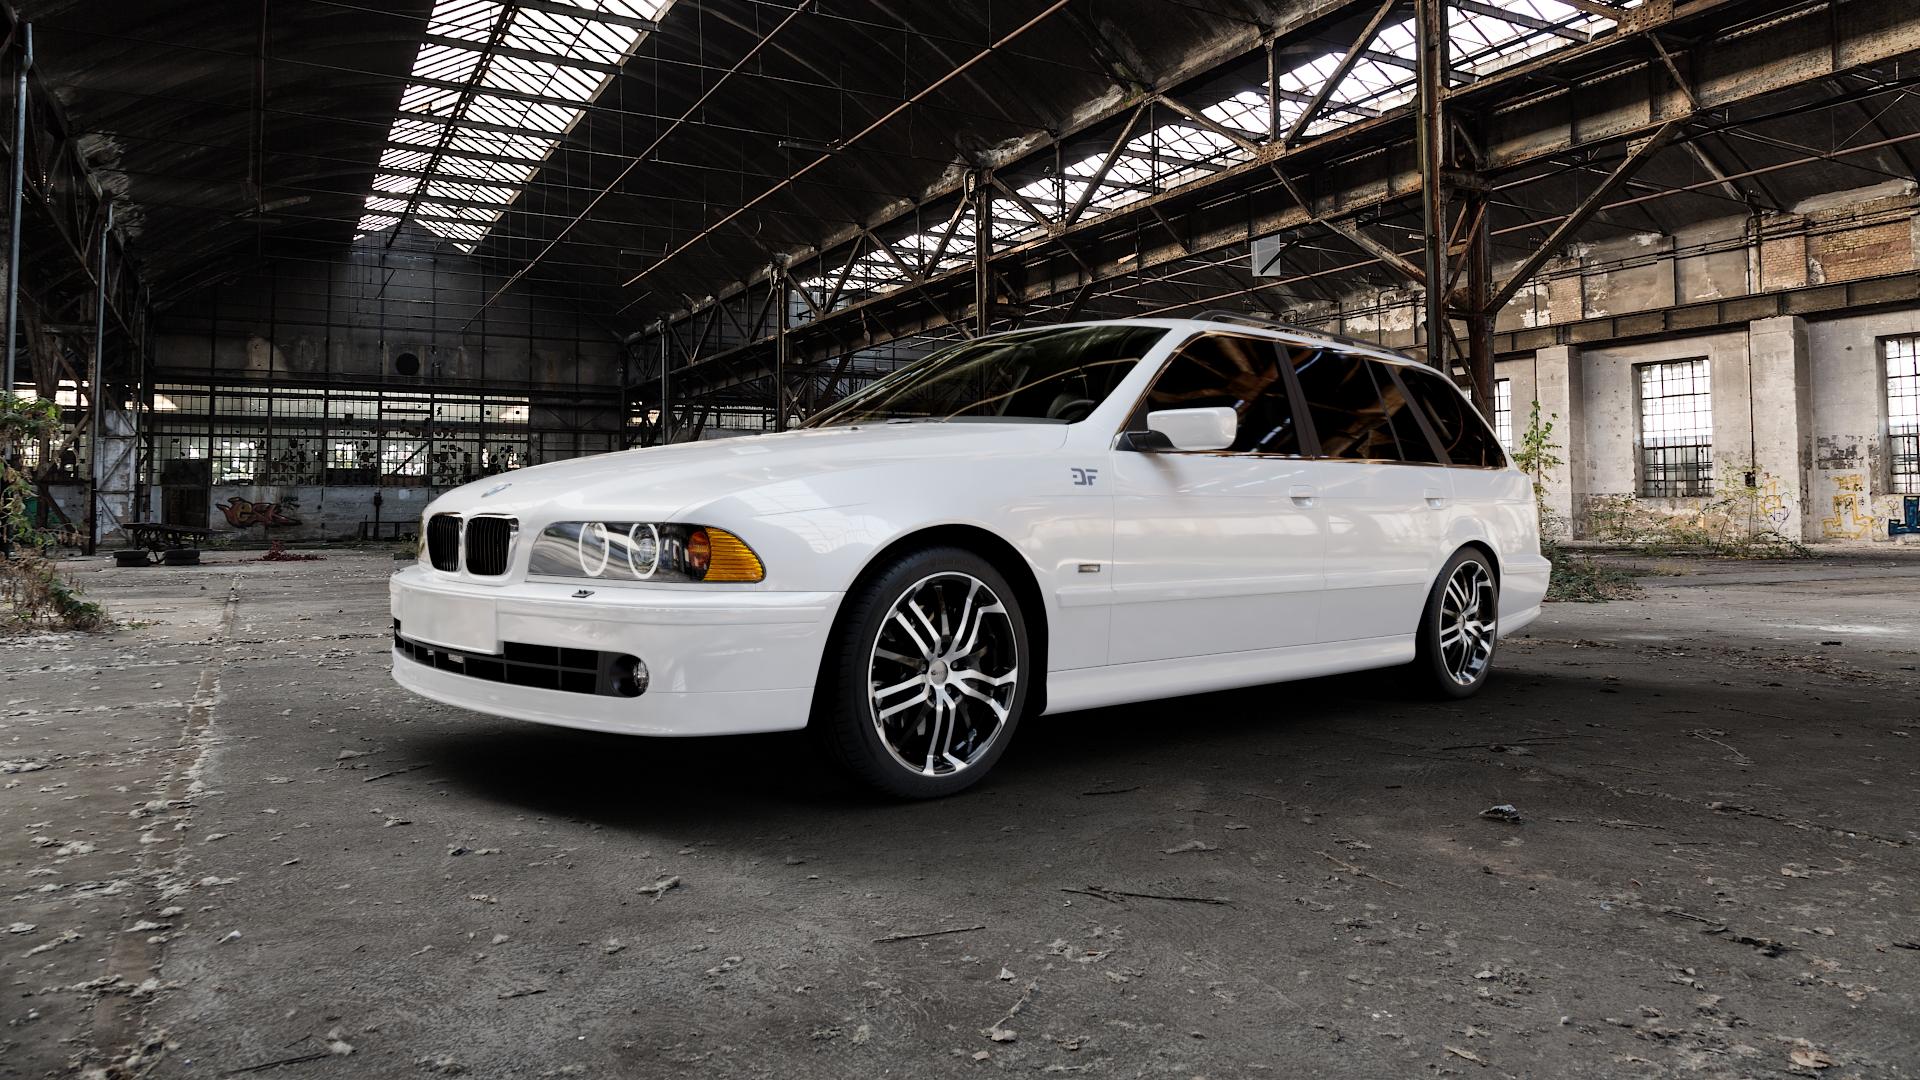 BMW 535i Type E39 (Limousine) 3,5l 173kW (235 hp) Wheels and Tyre Packages